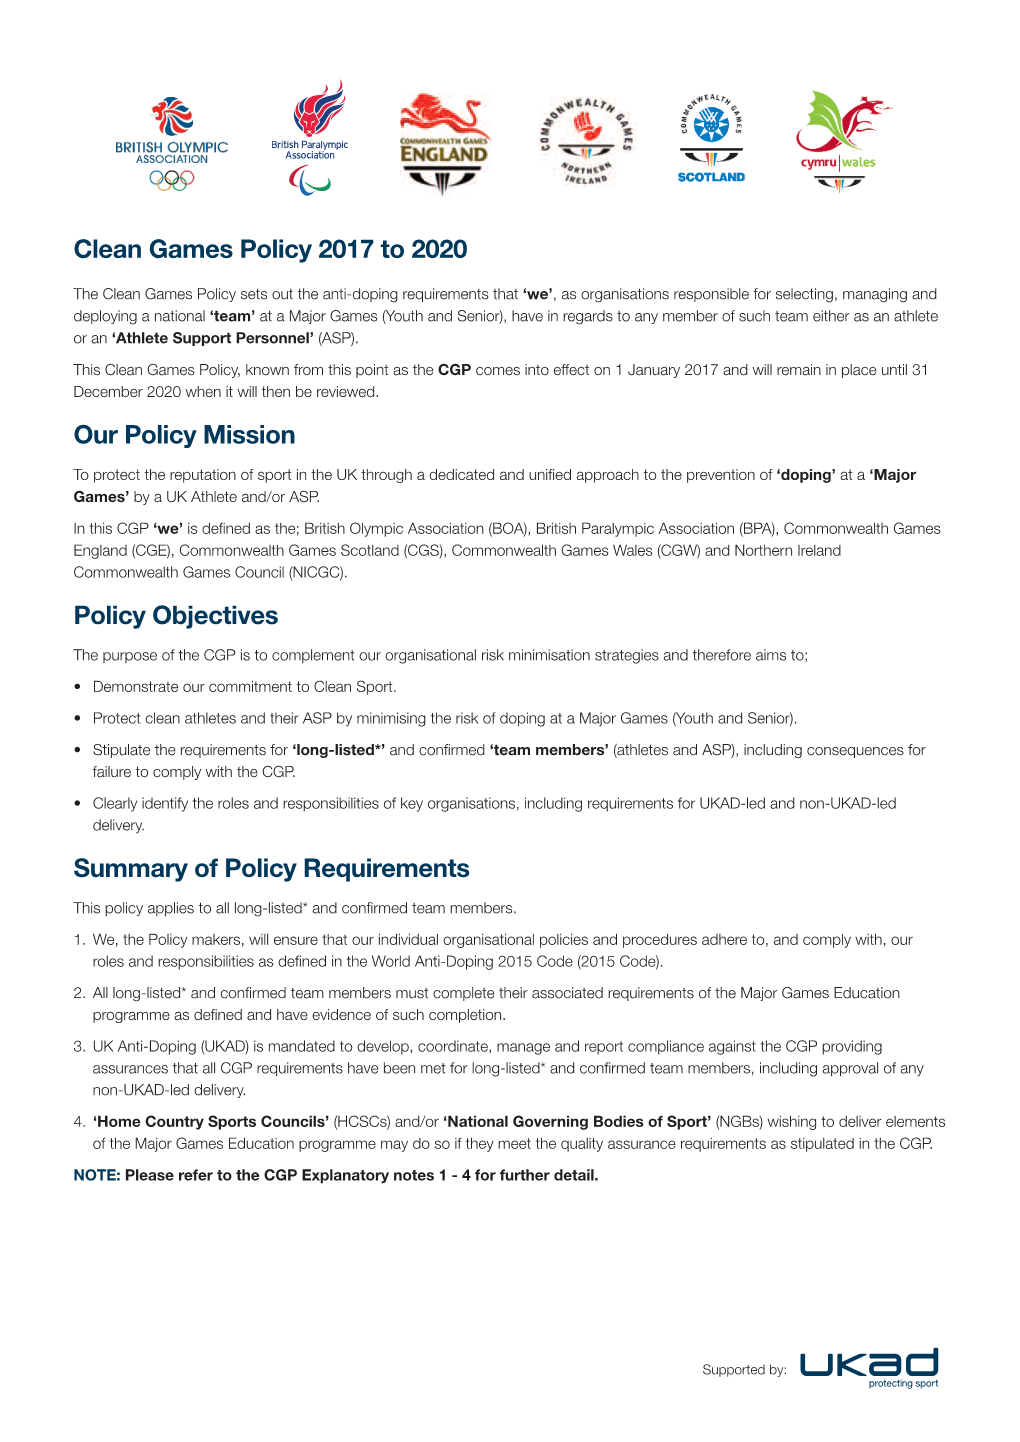 Clean Games Policy 2017 to 2020